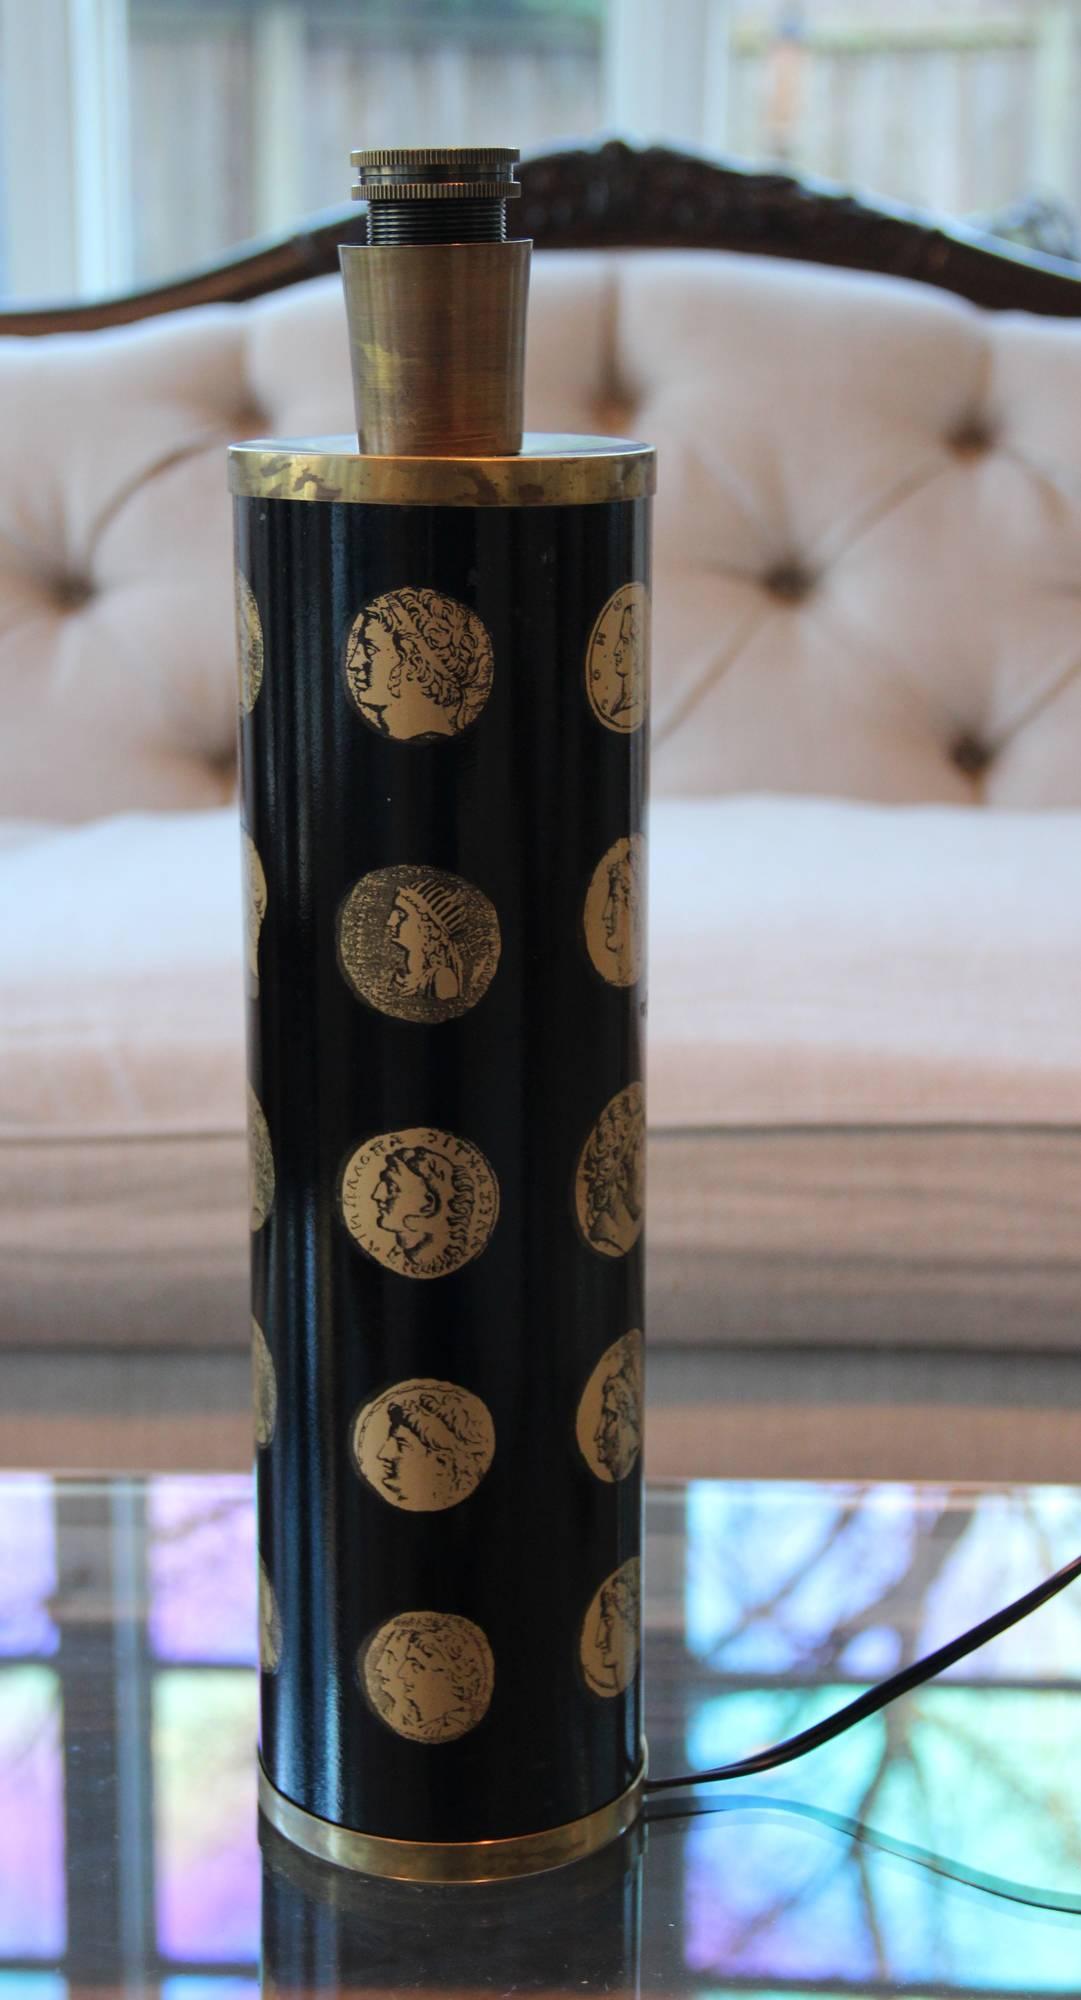 A Piero Fornasetti (1913-1988) 'Cameo' model neoclassical style table lamp from the Mid-Century Modern period, newly wired with a new socket and ready for use in the U.S. This Italian enameled metal table lamp with black base features gold transfer